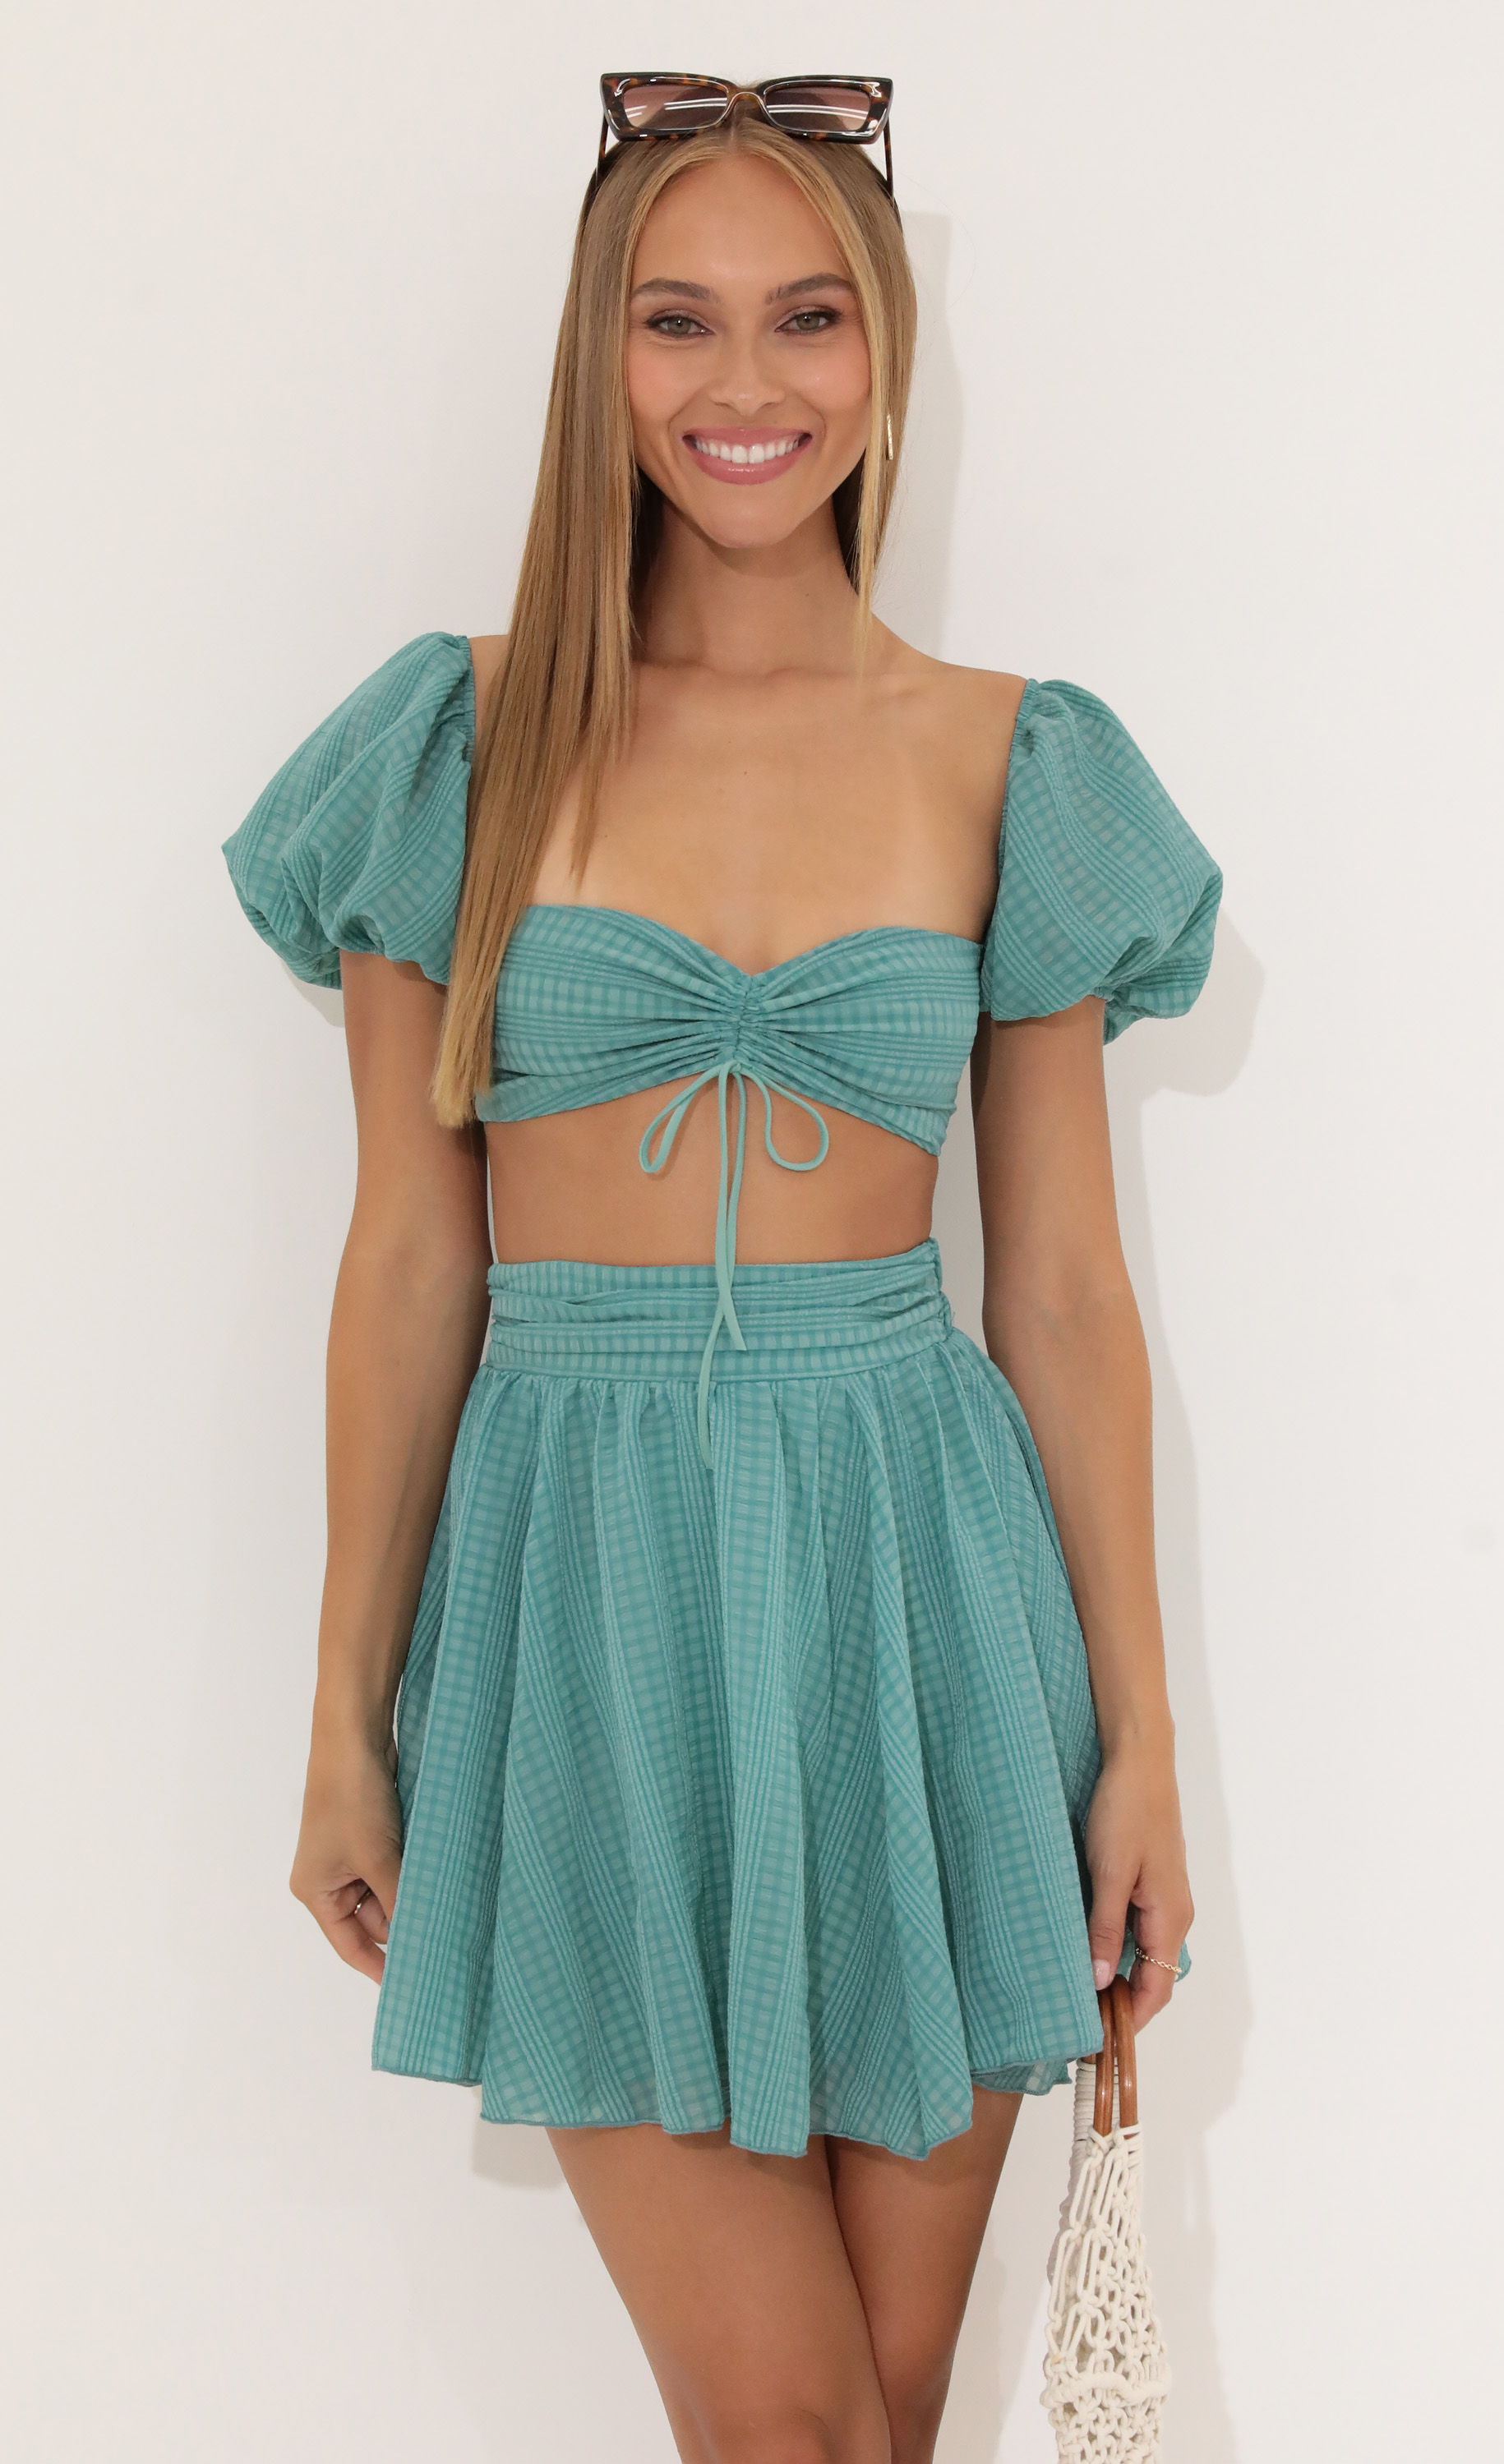 Solay Plaid Chiffon Baby Doll Two Piece Skirt Set in Green